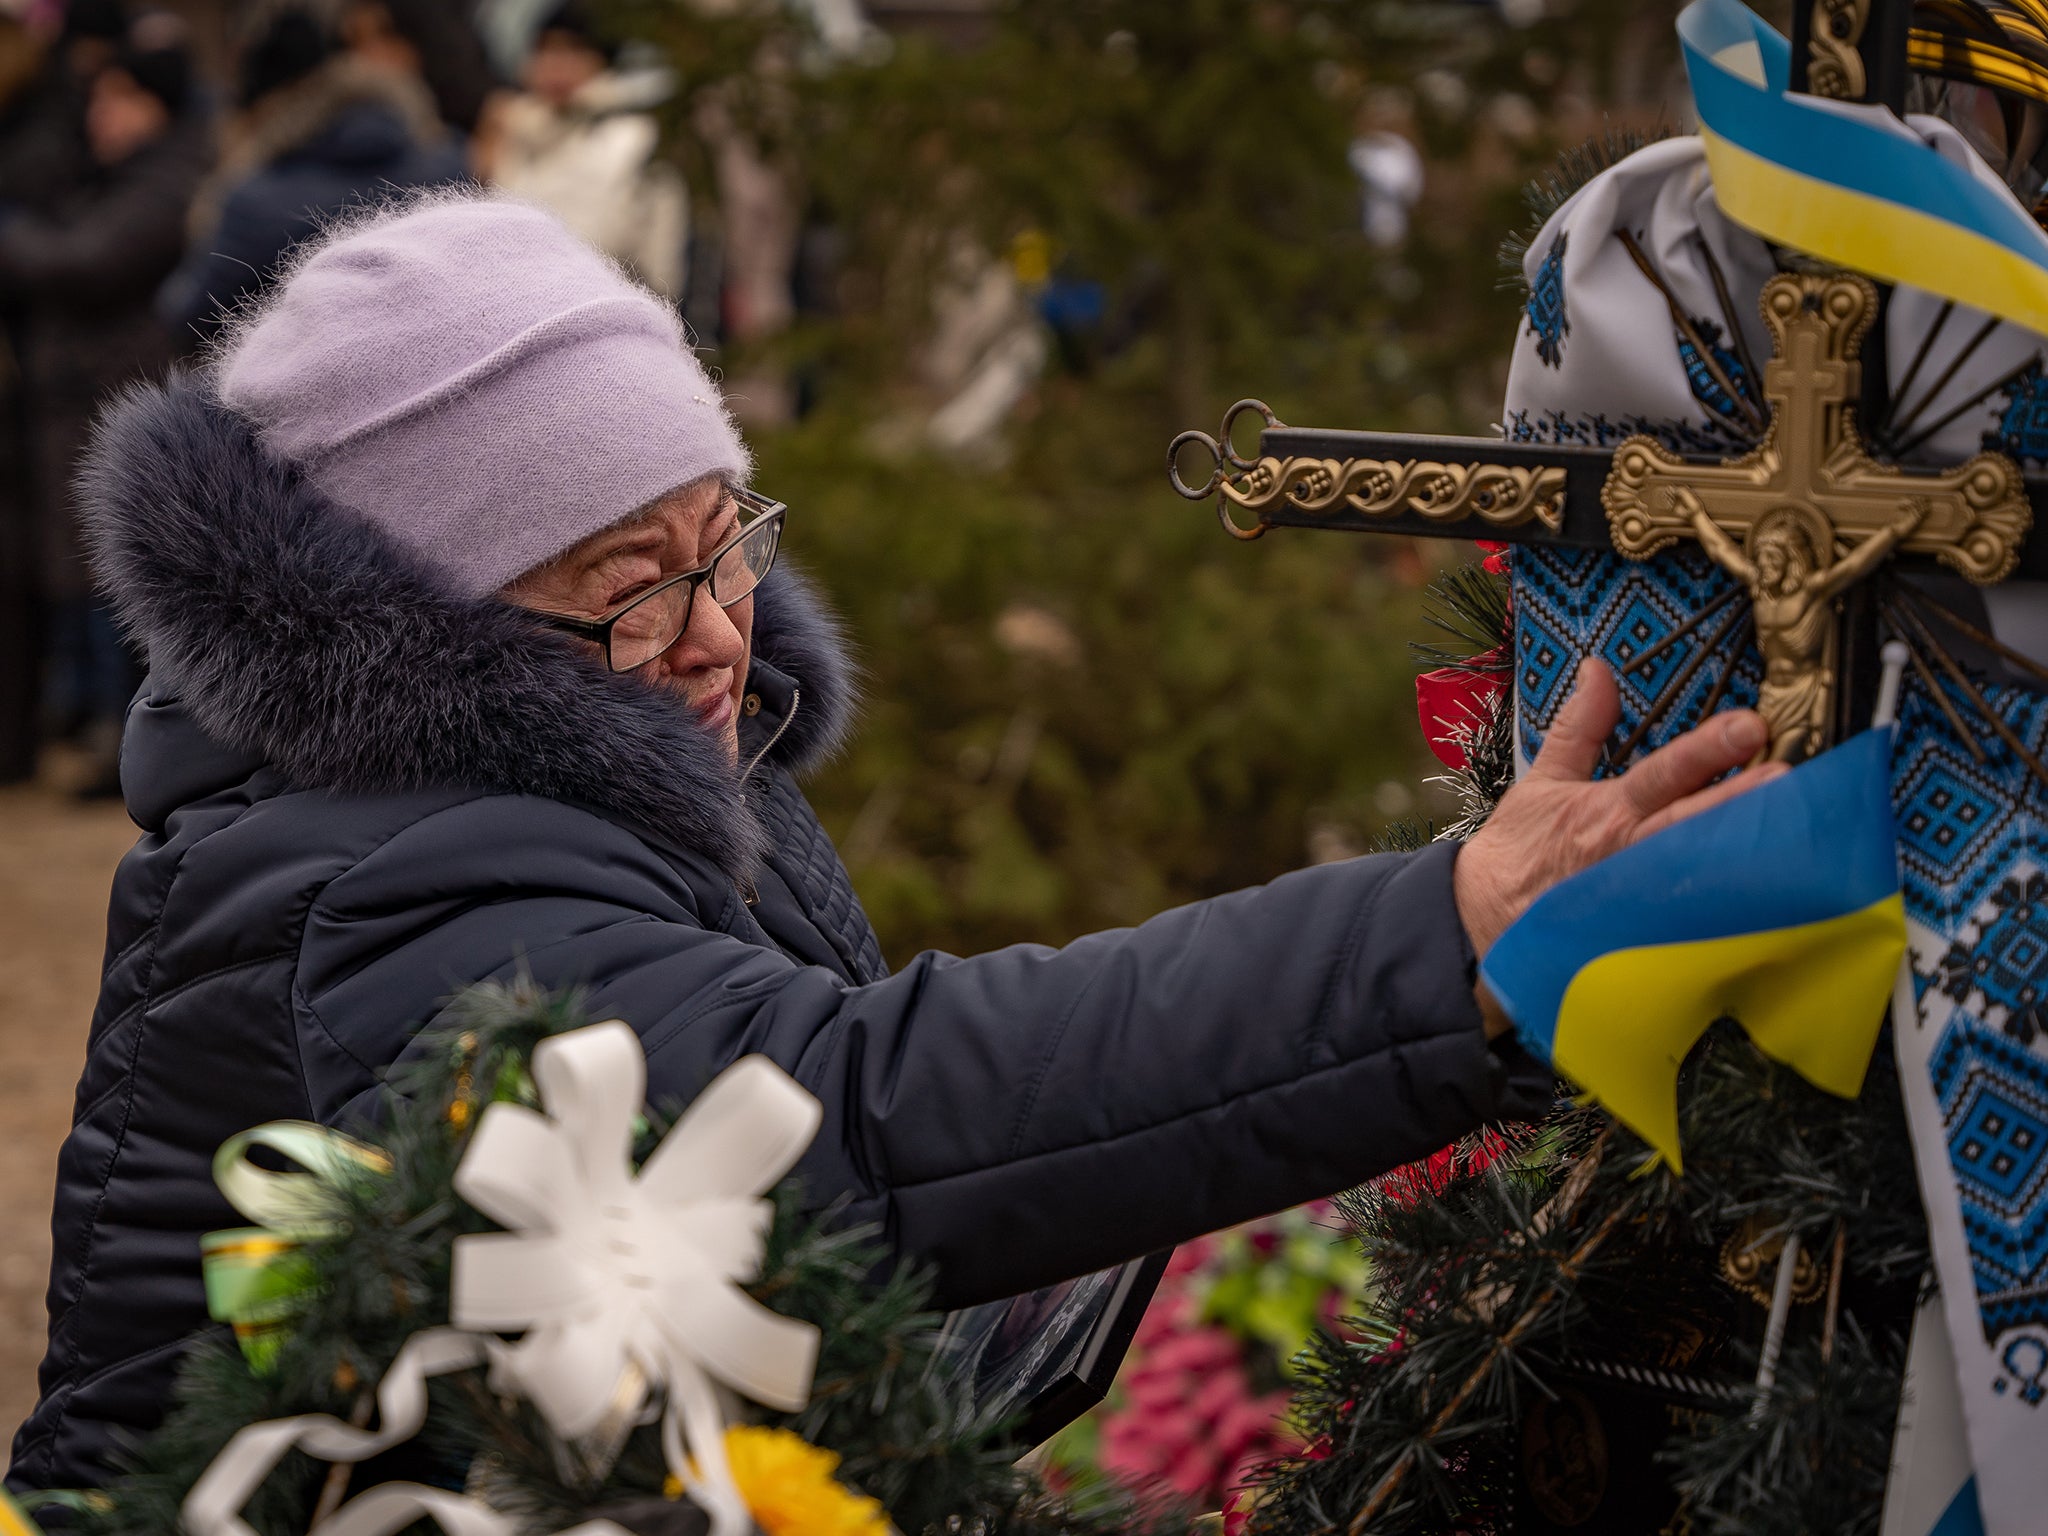 An elderly resident of Bakhmut cries as she marks the anniversary of Russia’s invasion of Ukraine